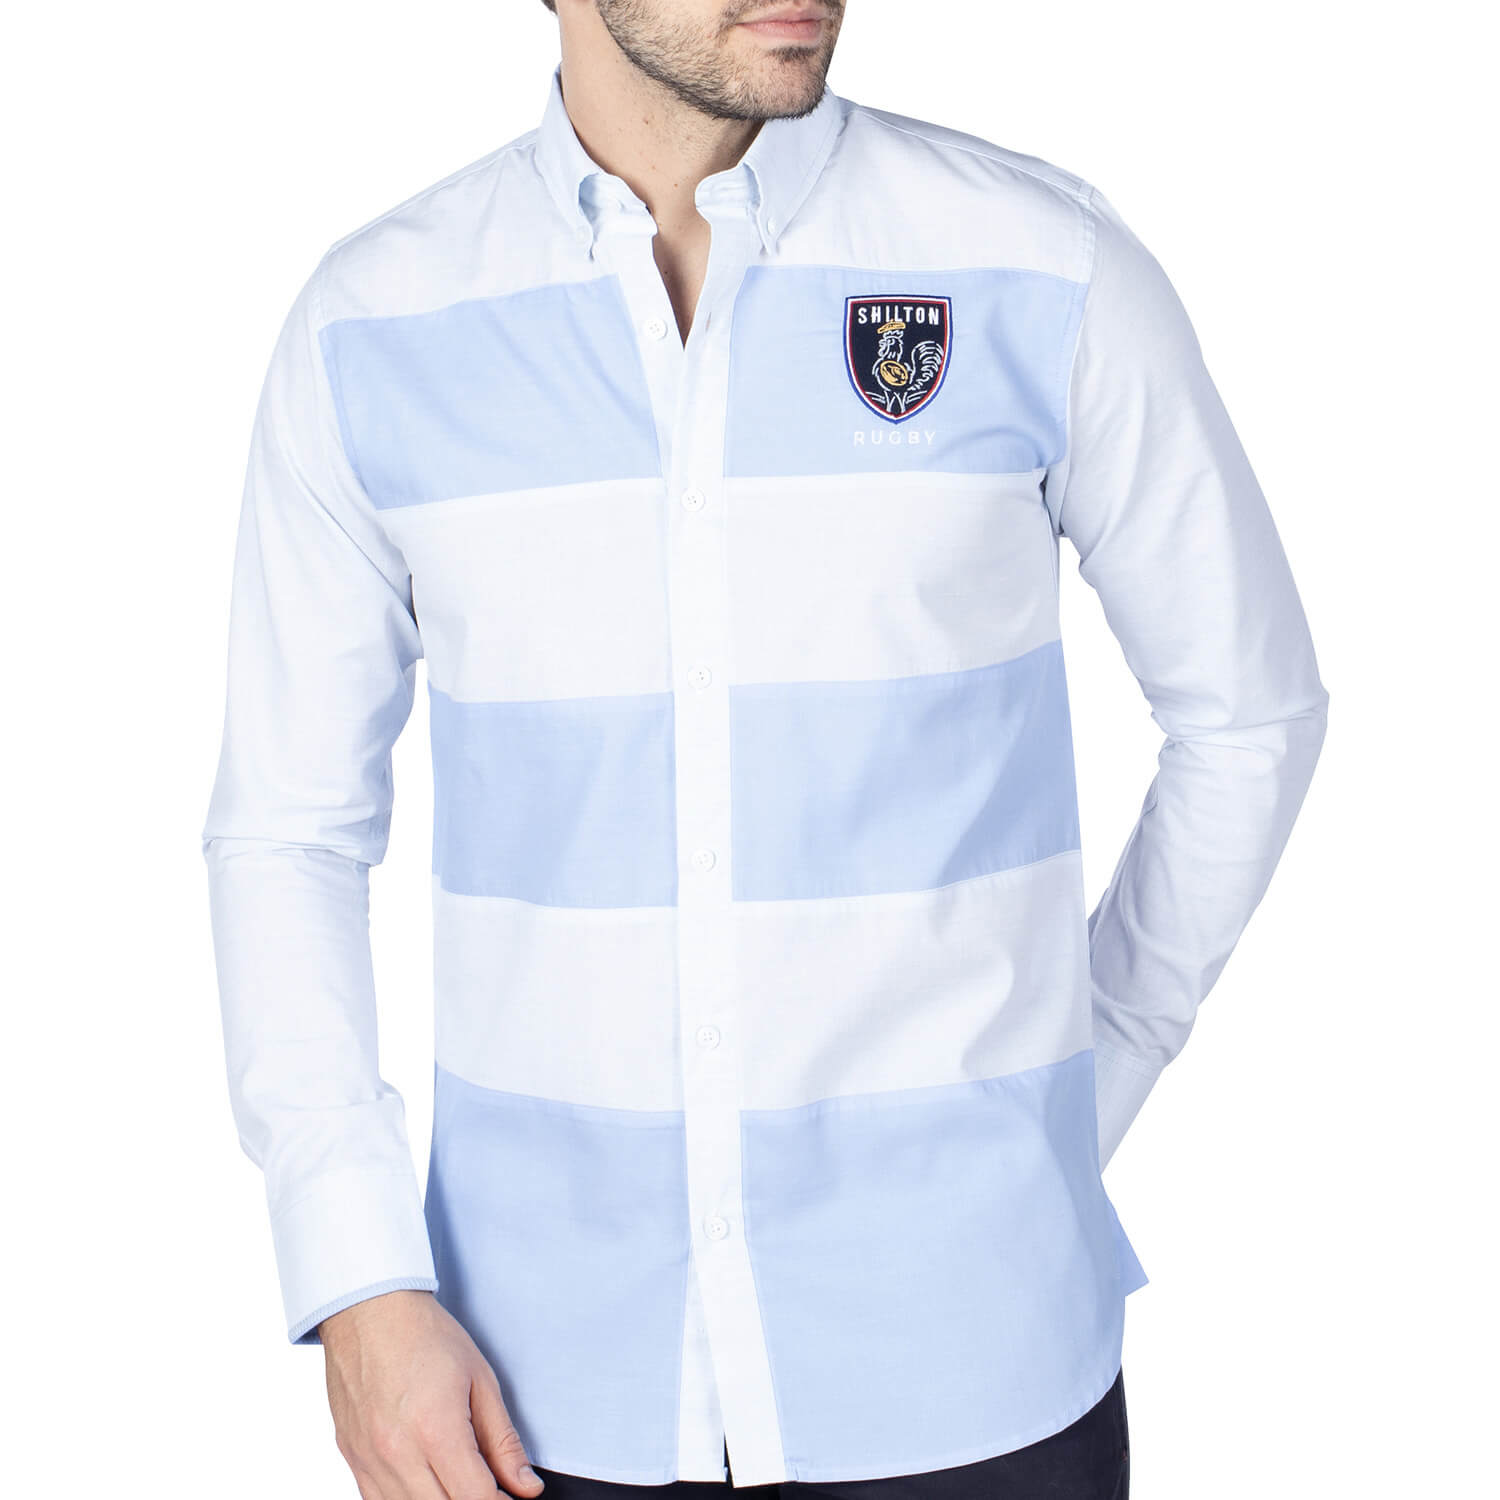 Chemise bicolore rugby